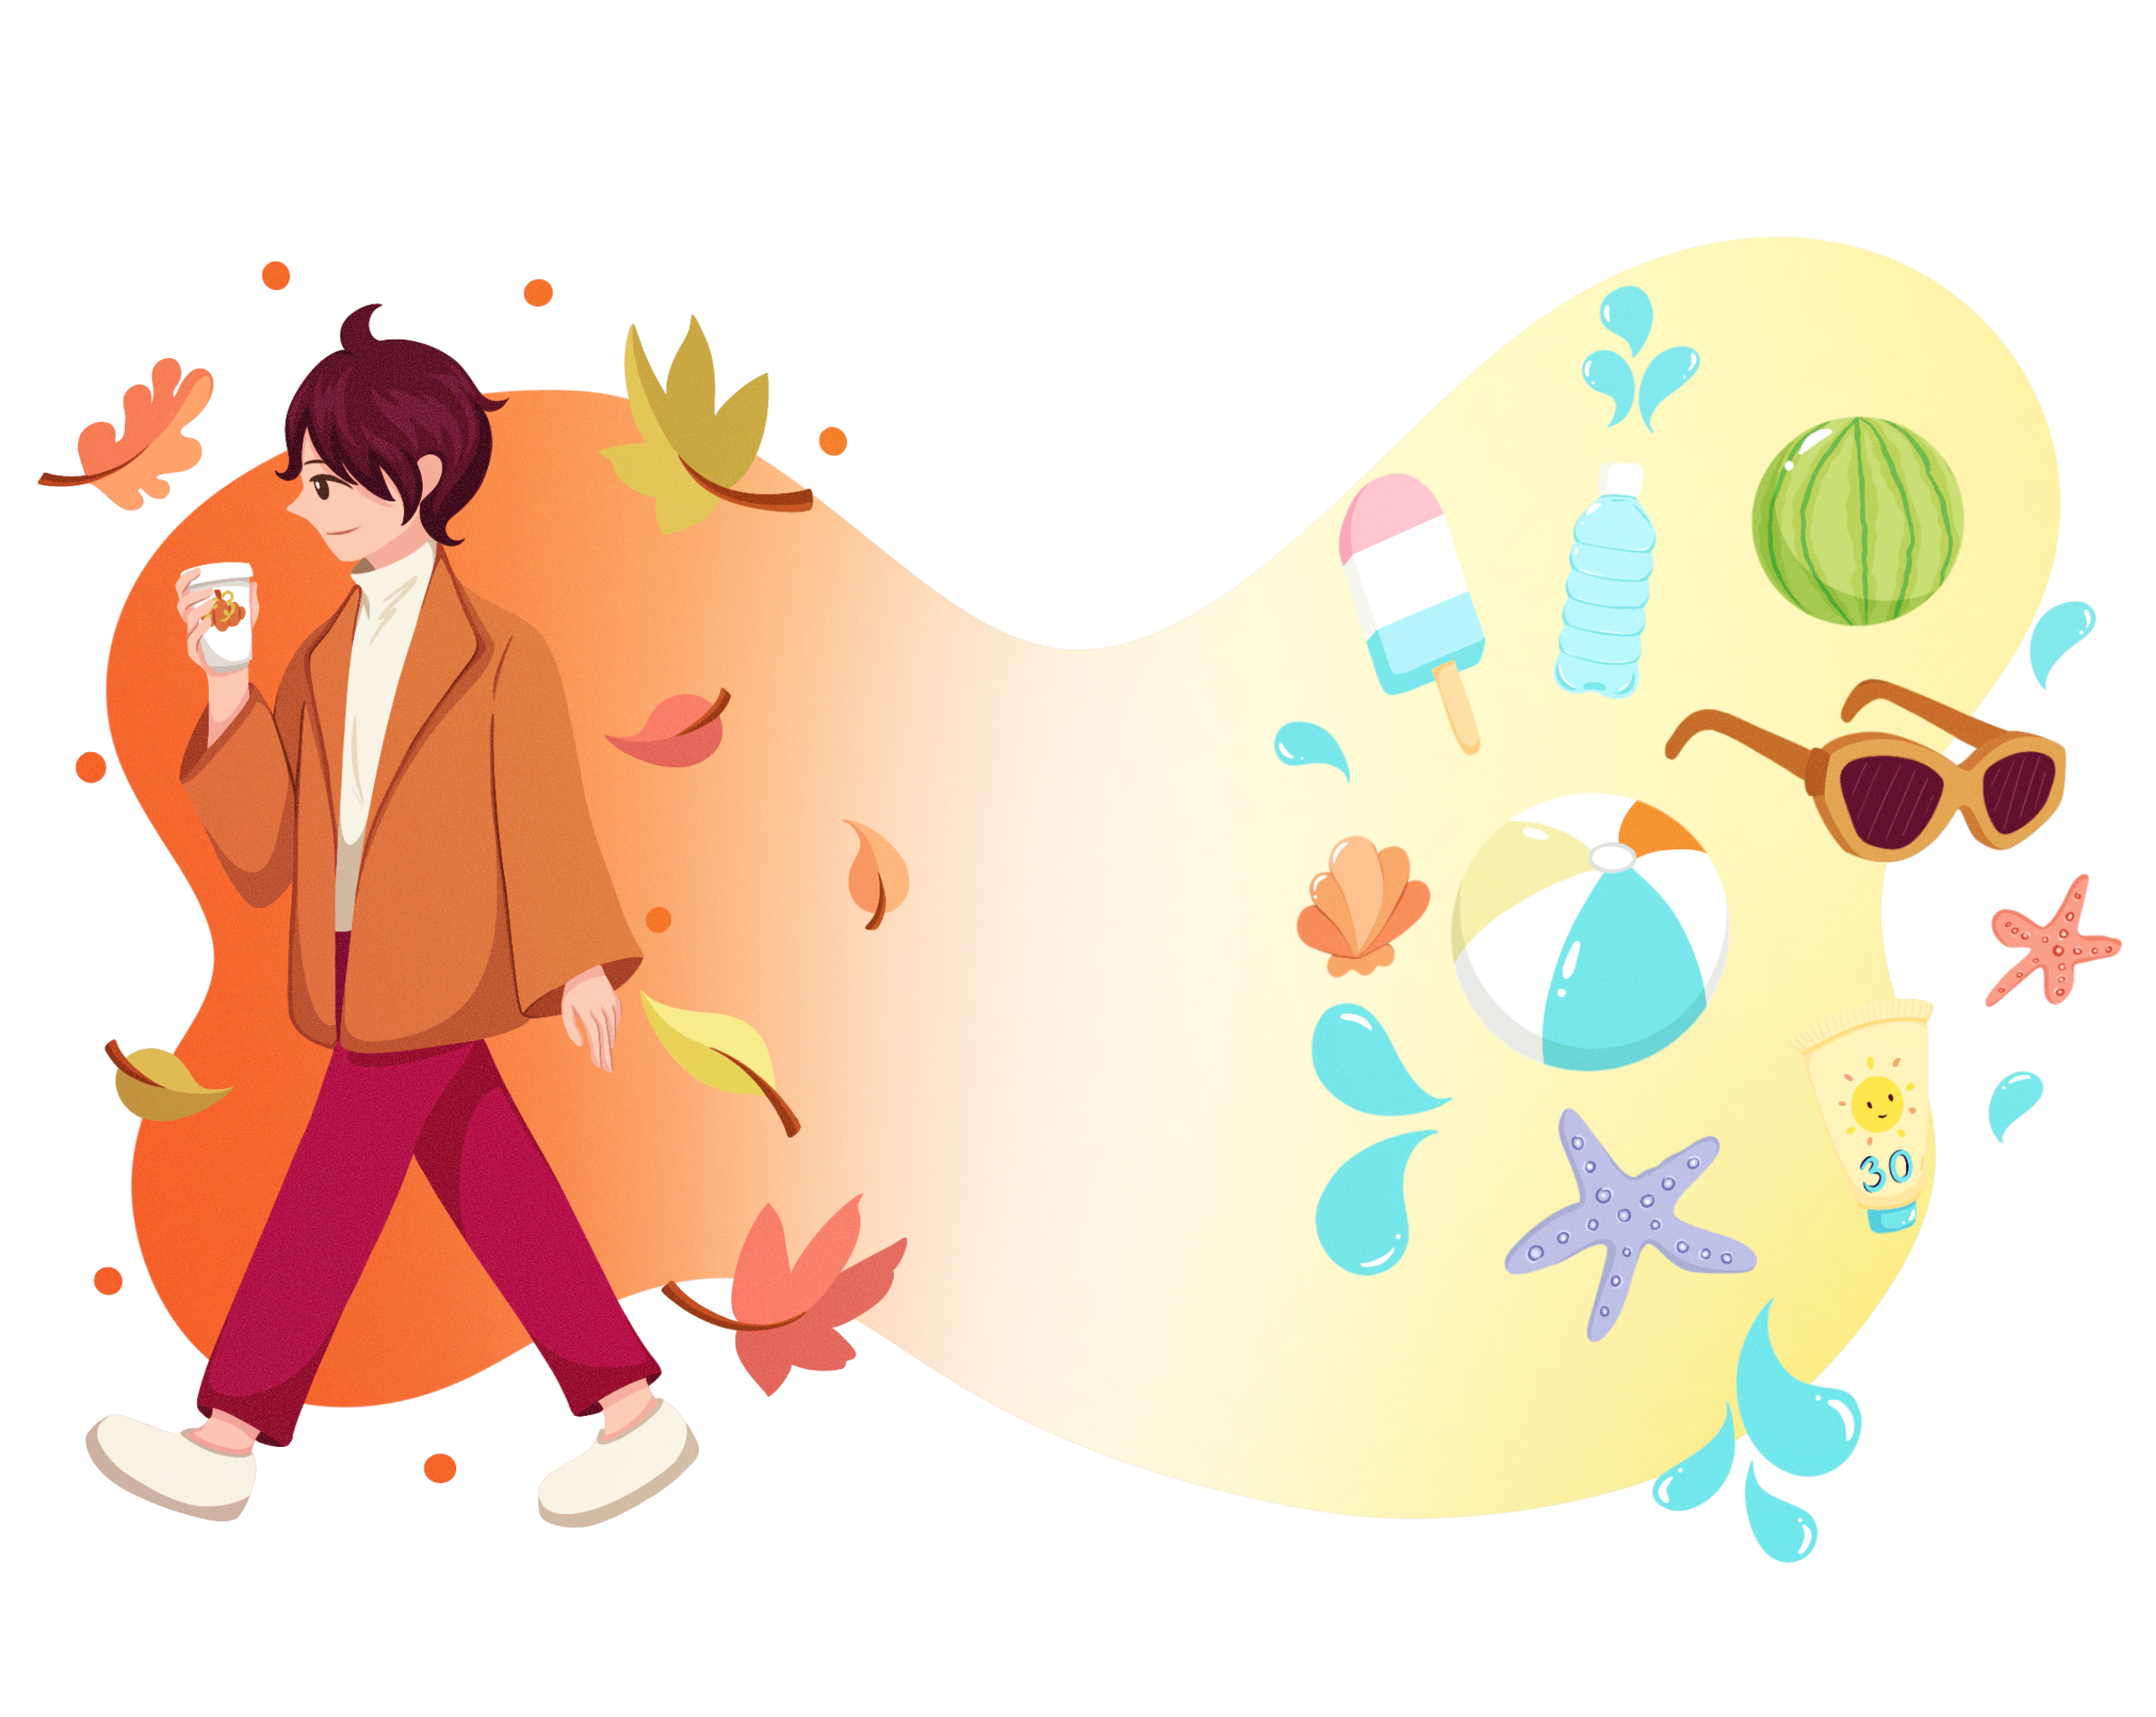 Someone walking away from summer items (ex: beach balls, watermelon, sunglasses) wearing fall colours, a jacket, and holding a pumpkin spice latte